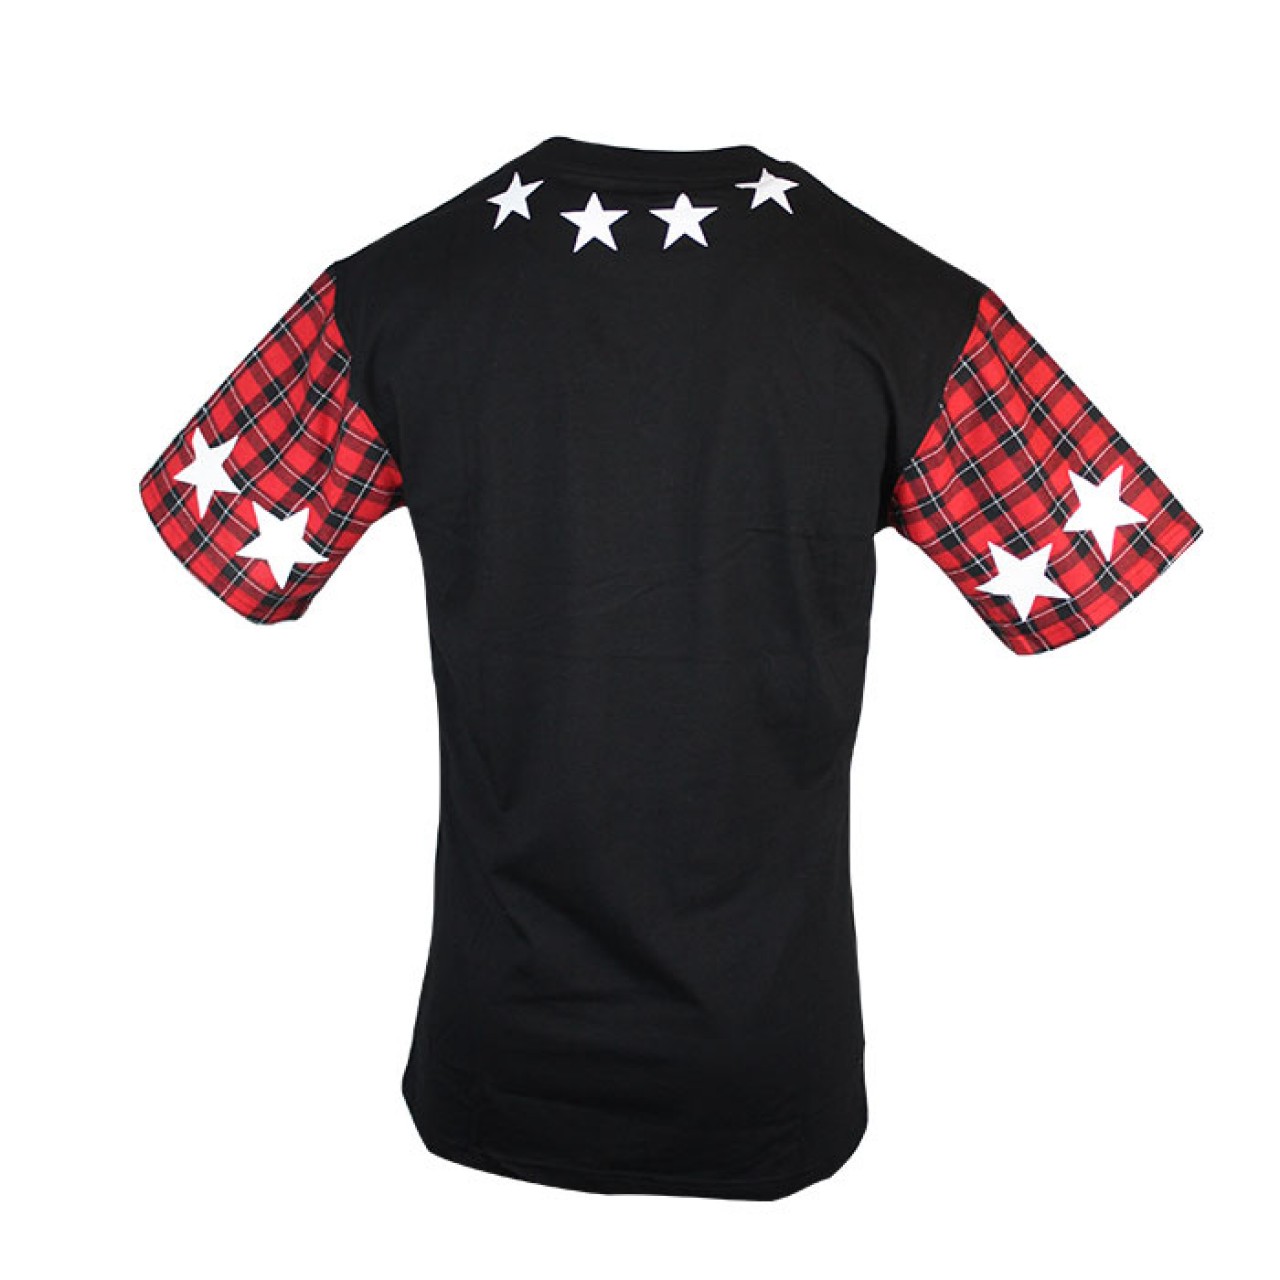 Men's USA Basketball T Shirt Design Black With Red And White Checked